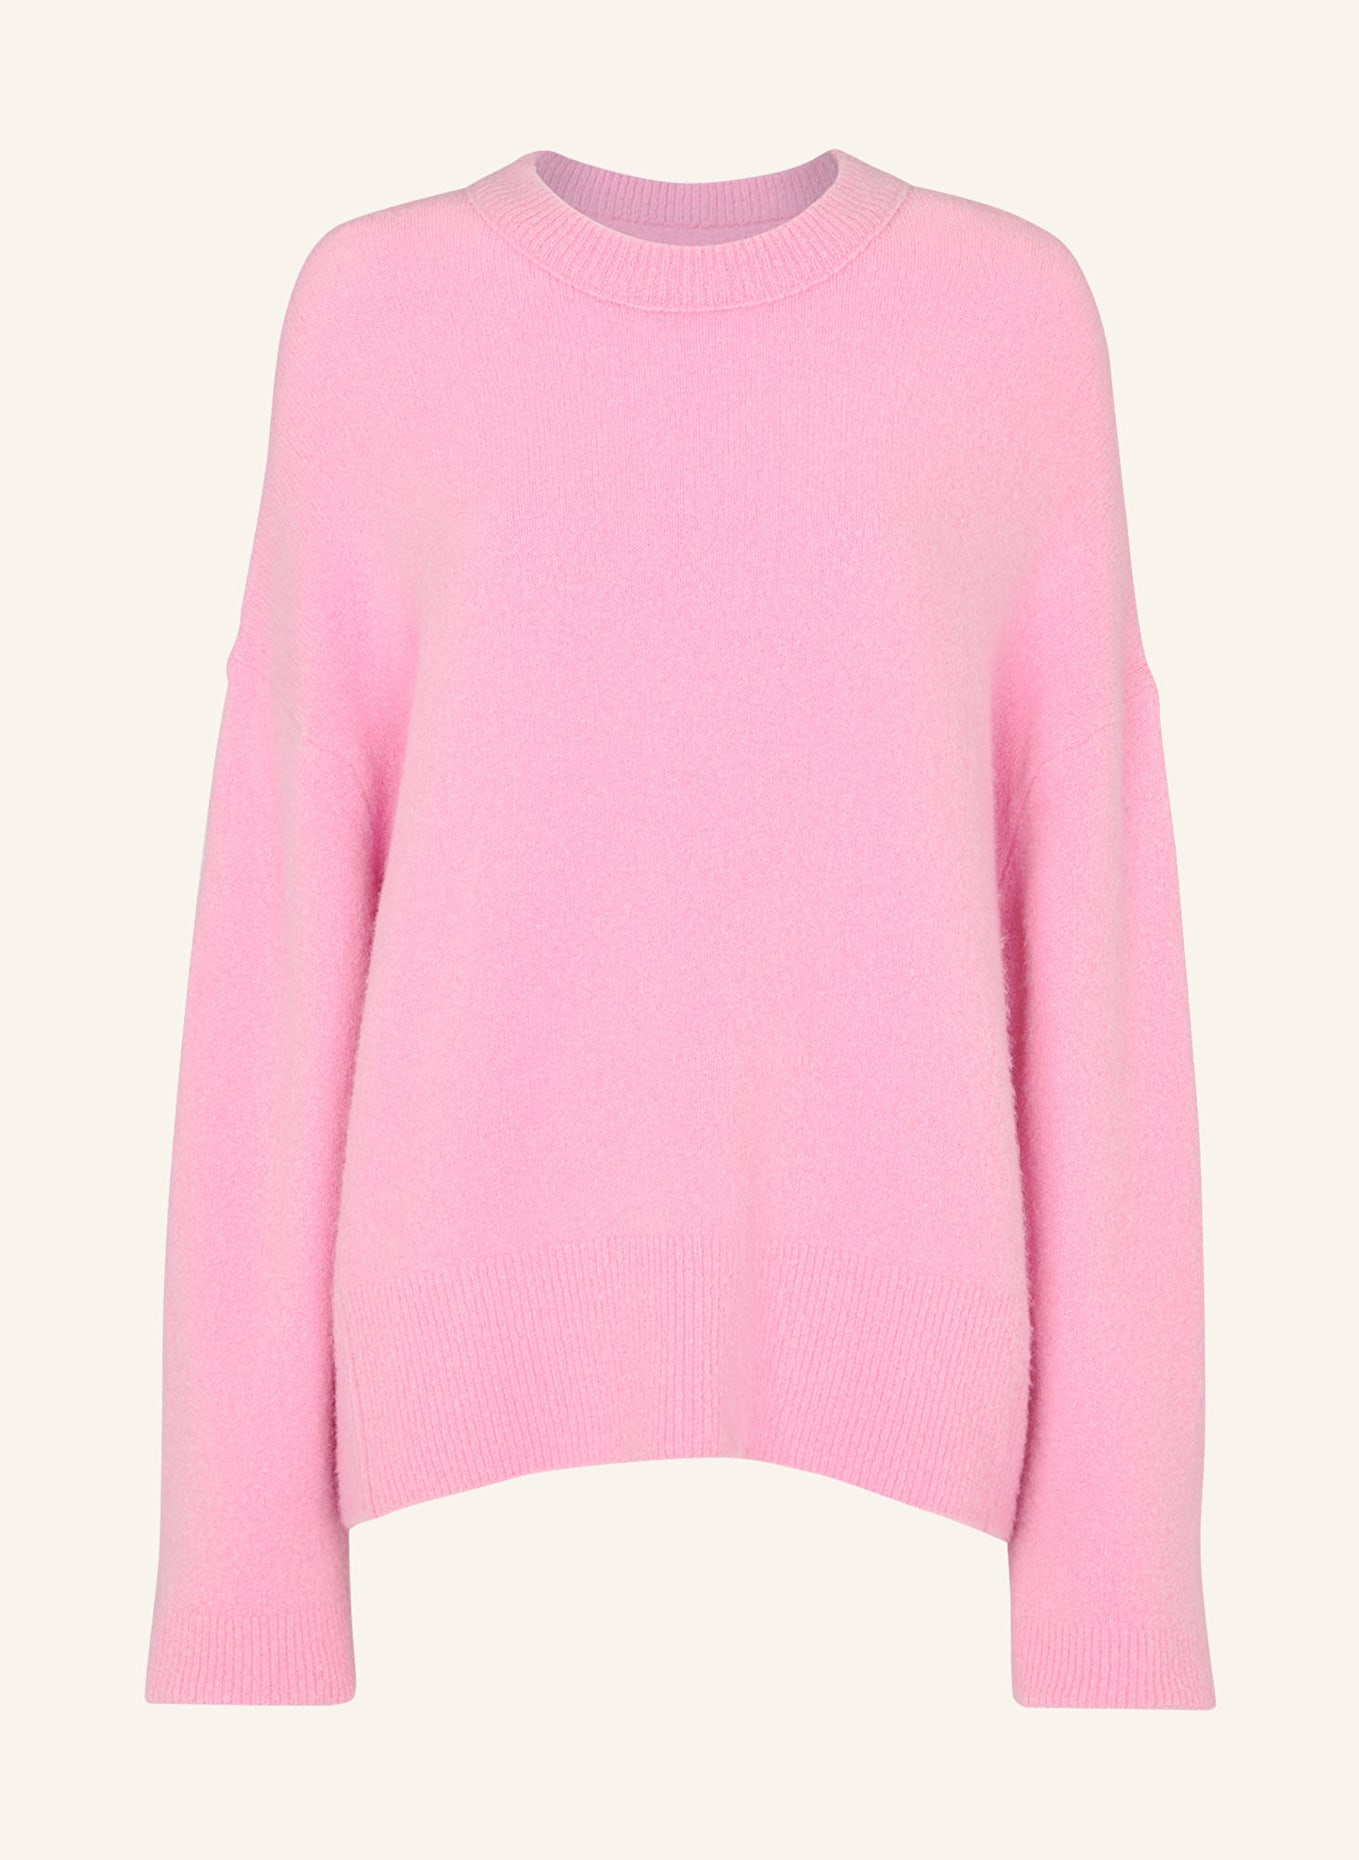 WHISTLES Pullover, Farbe: PINK (Bild 1)